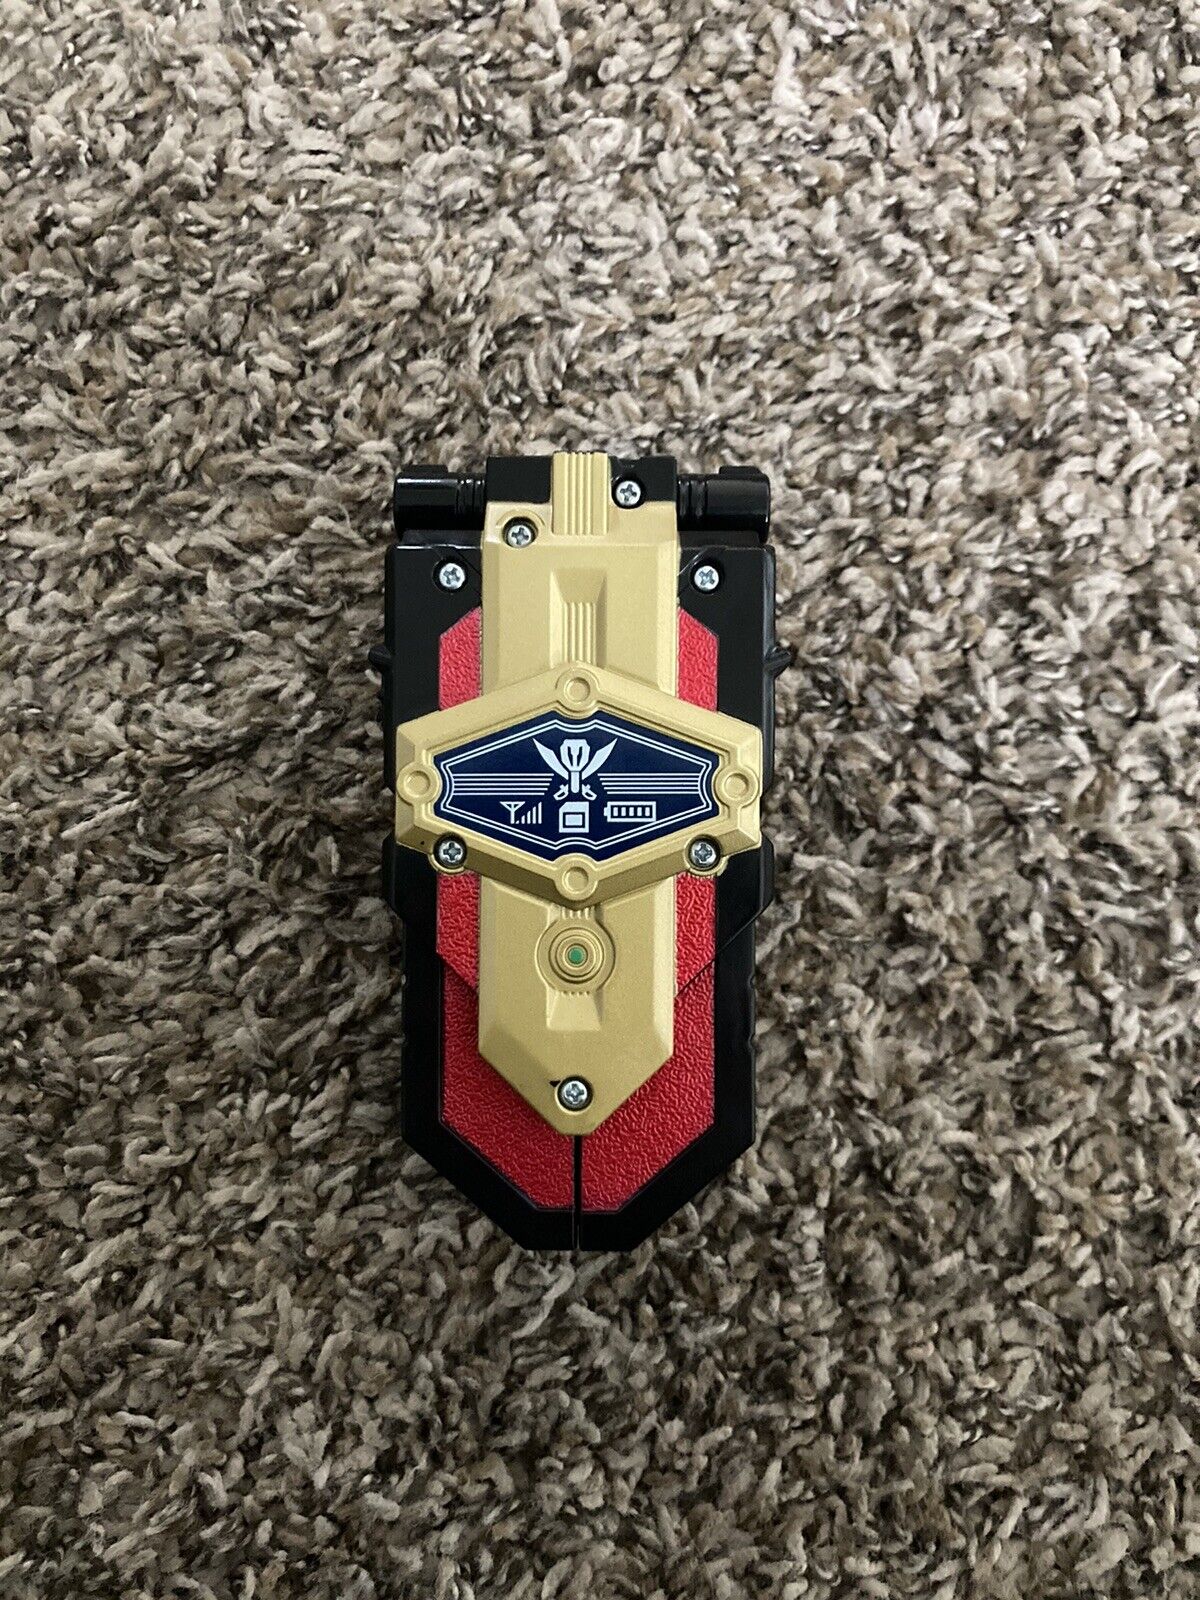 Bandai Power Rangers Gokaiger DX Legend Mobirates Morpher Cell Mobile Phone 